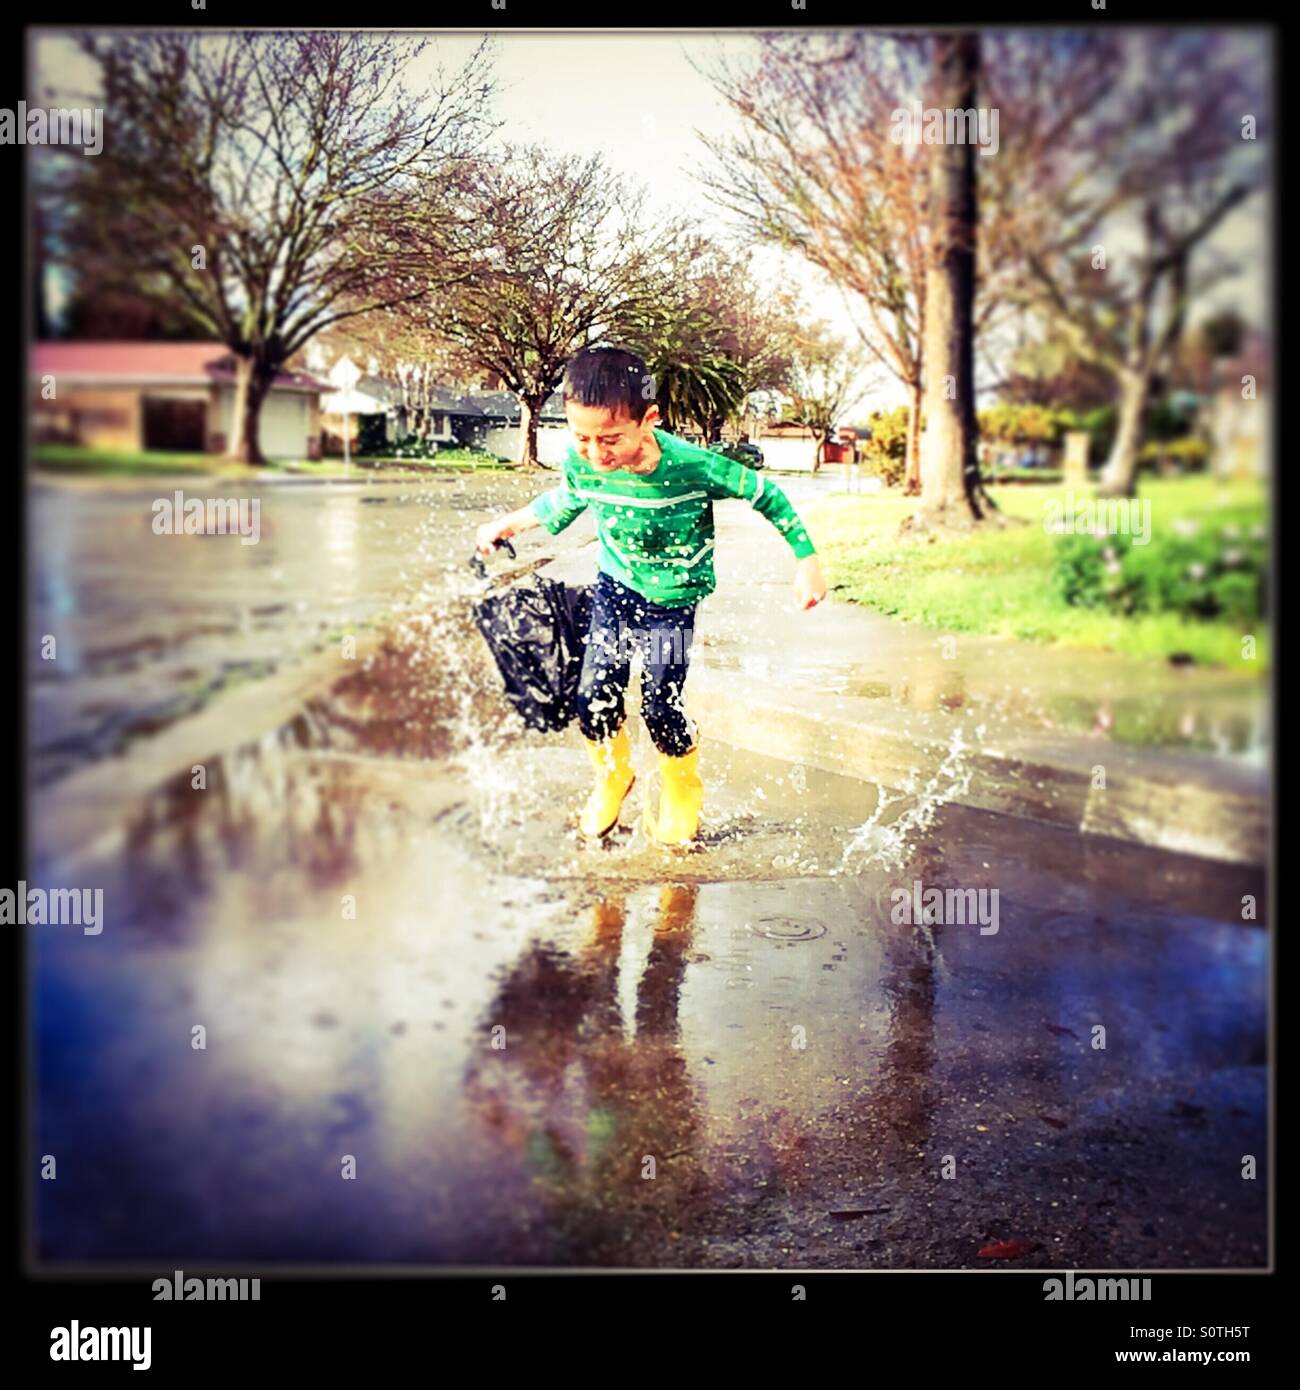 A 7 year old boy jumps into a puddle with his rain boots on. Stock Photo